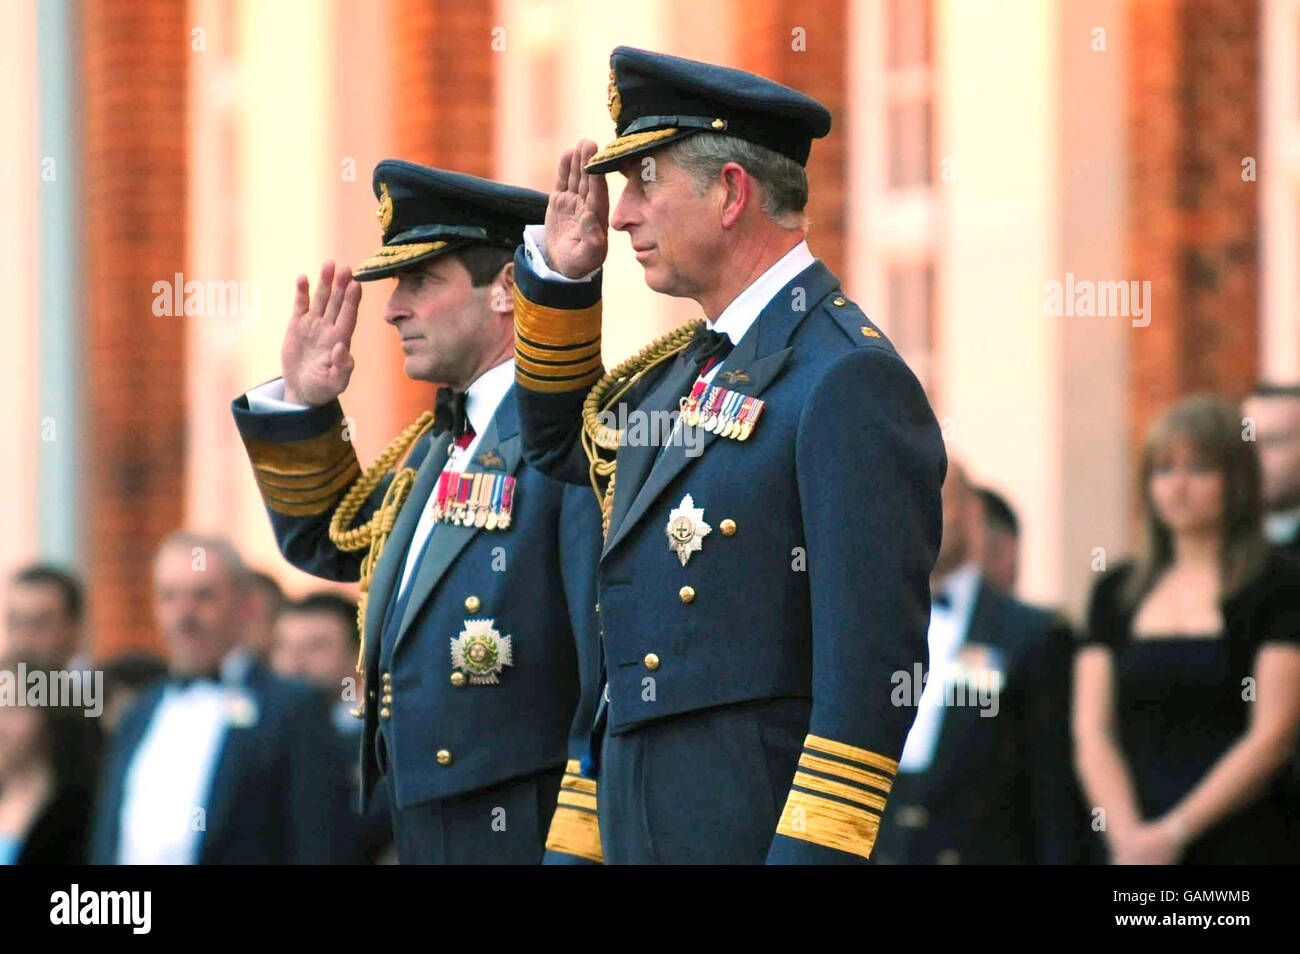 The Prince of Wales, right and Chief of the Air Staff, Air Chief Marshal Sir Glenn Torpy, left, salute during a Sunset Ceremony at RAF Cranwell in Lincolnshire as part of the RAF's 90th anniversary celebrations. Stock Photo